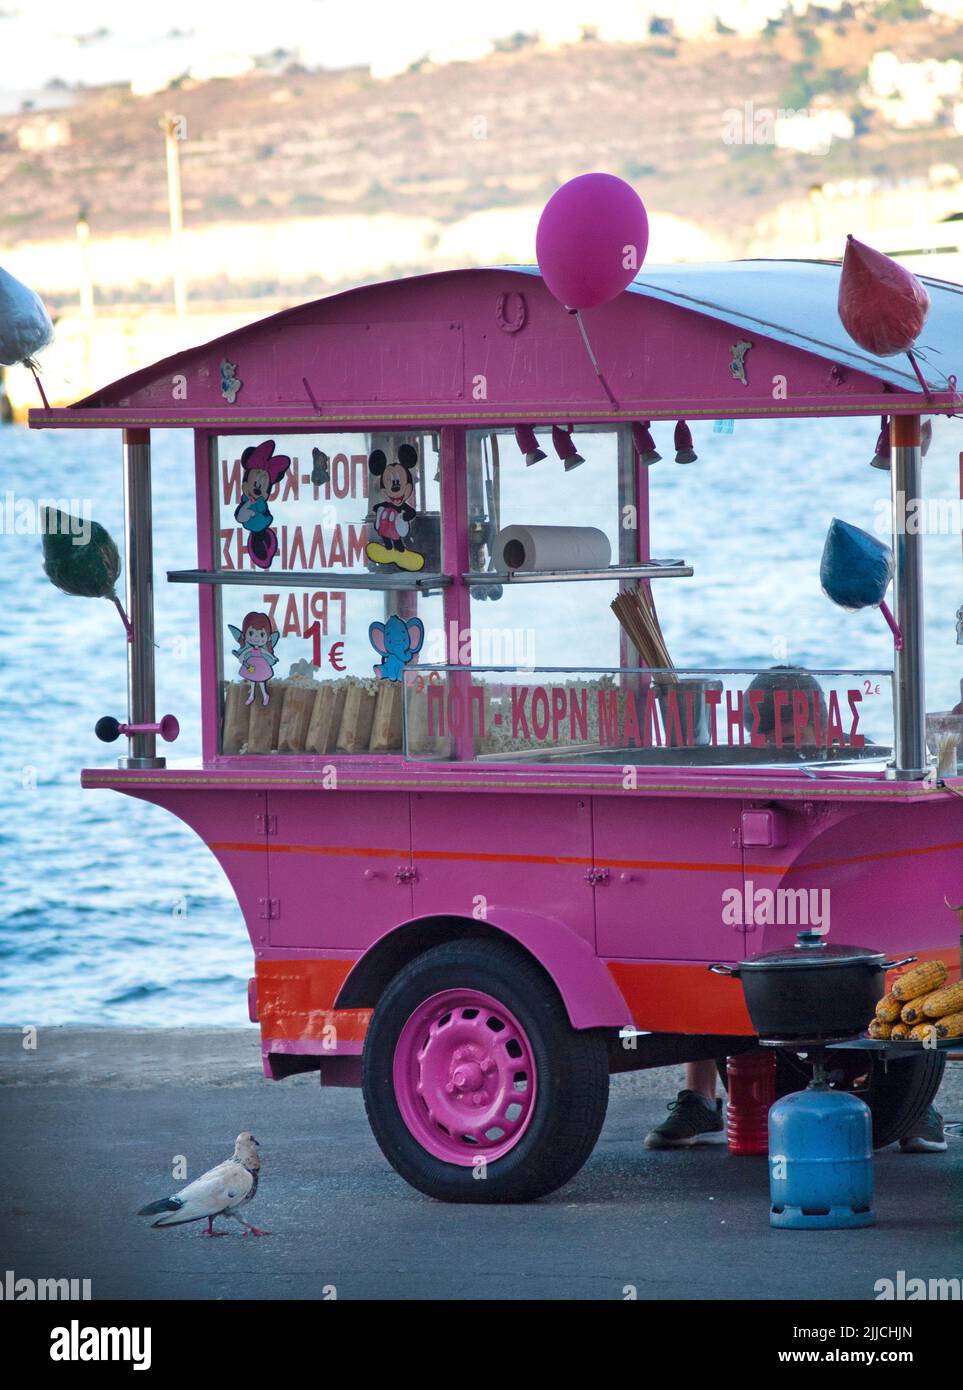 In Chania, Crete a pink food truck sells corn Stock Photo